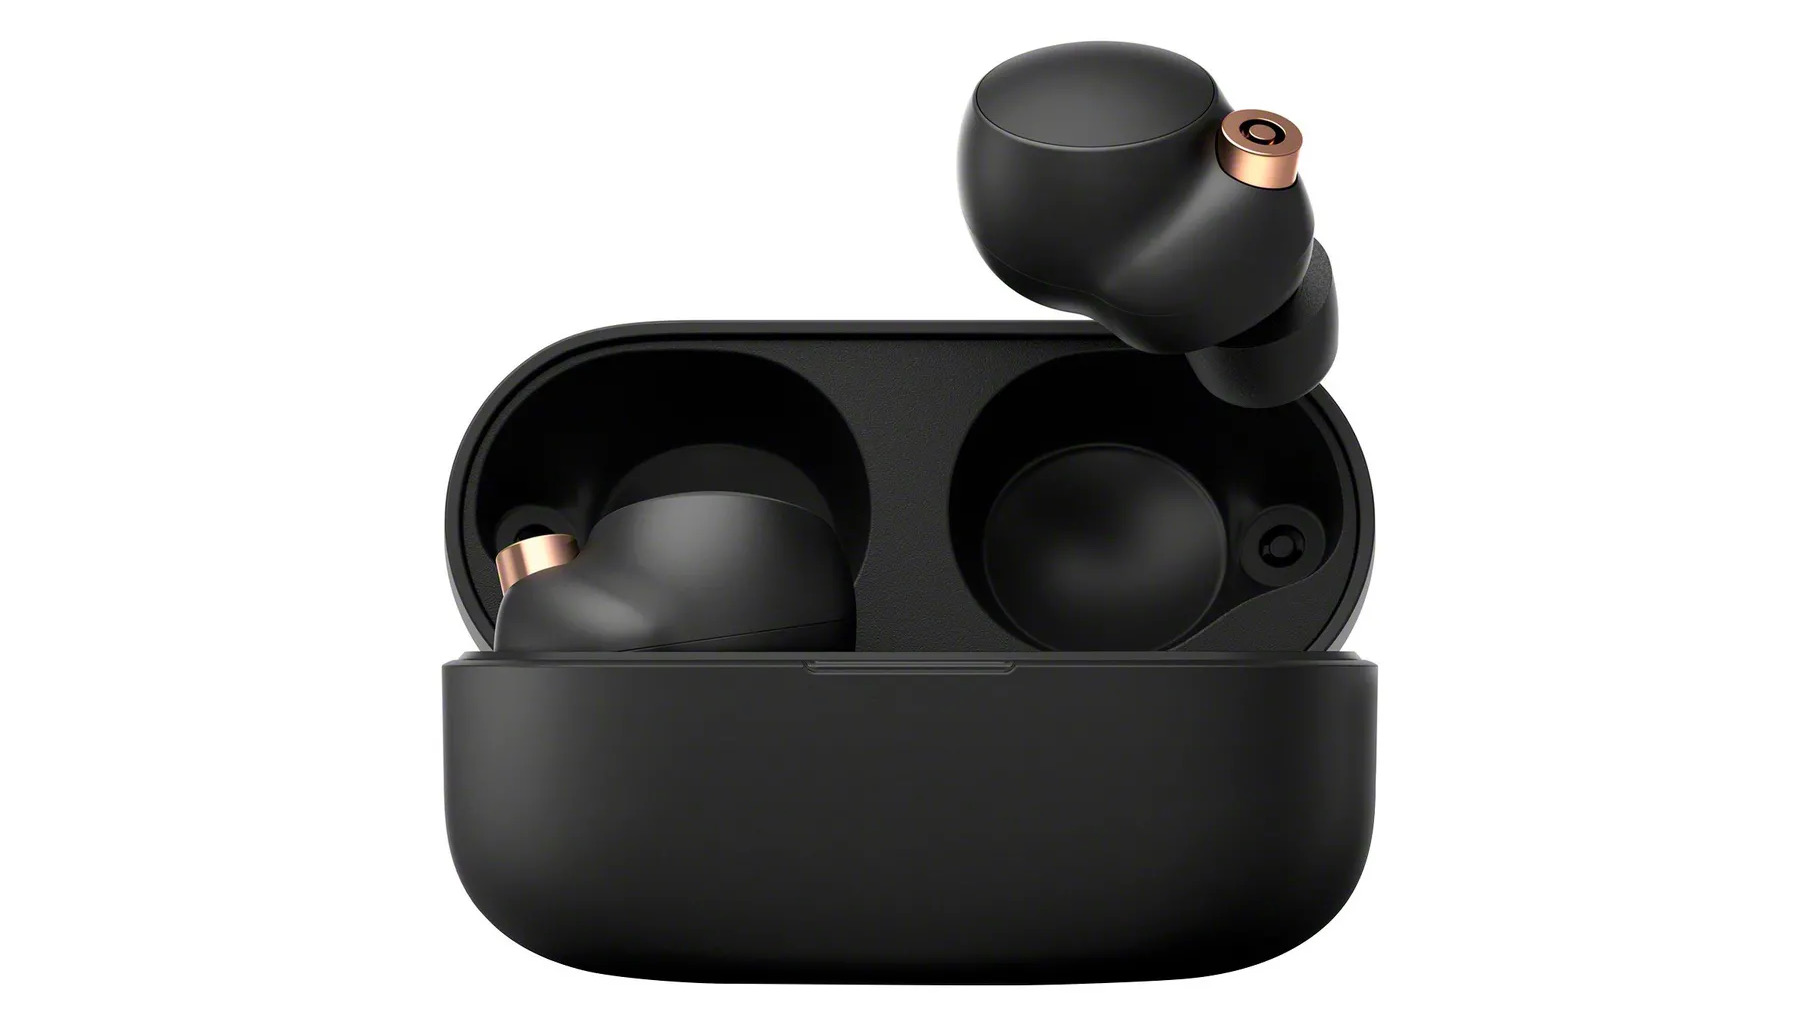 sony-wf-1000xm4-render-leak-gives-best-look-yet-at-new-wireless-earbuds